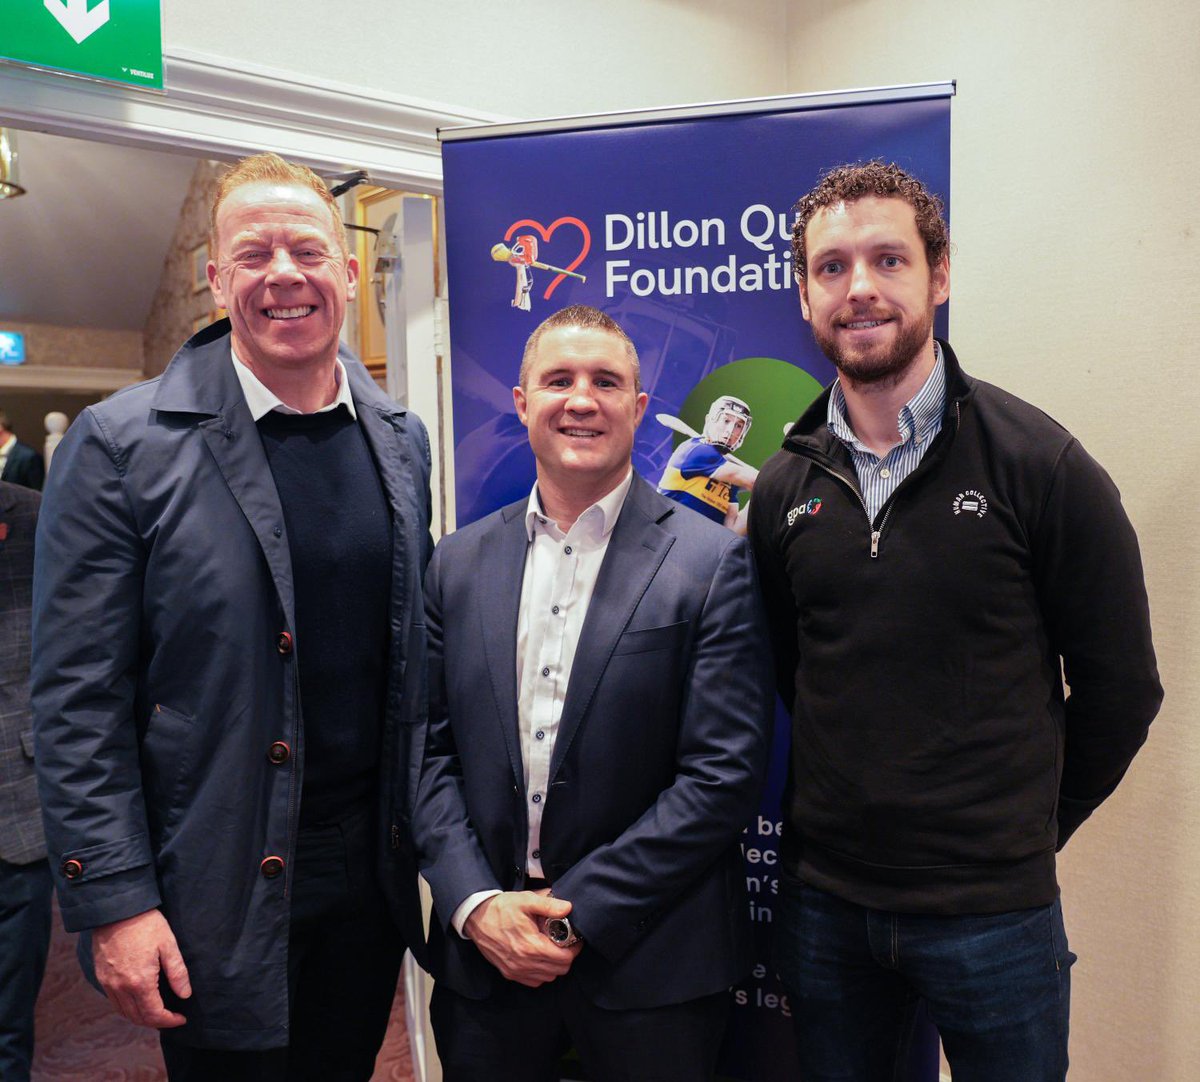 Our CEO @TomParsons_8 was delighted to join with fellow Irish Athletes Alliance members @PFAIOfficial General Secretary Stephen McGuinness & @RugPlayersIRE CEO Simon Keogh to support the launch of the Dillon Quirke Foundation today. #advocacy #playersvoice #welfare